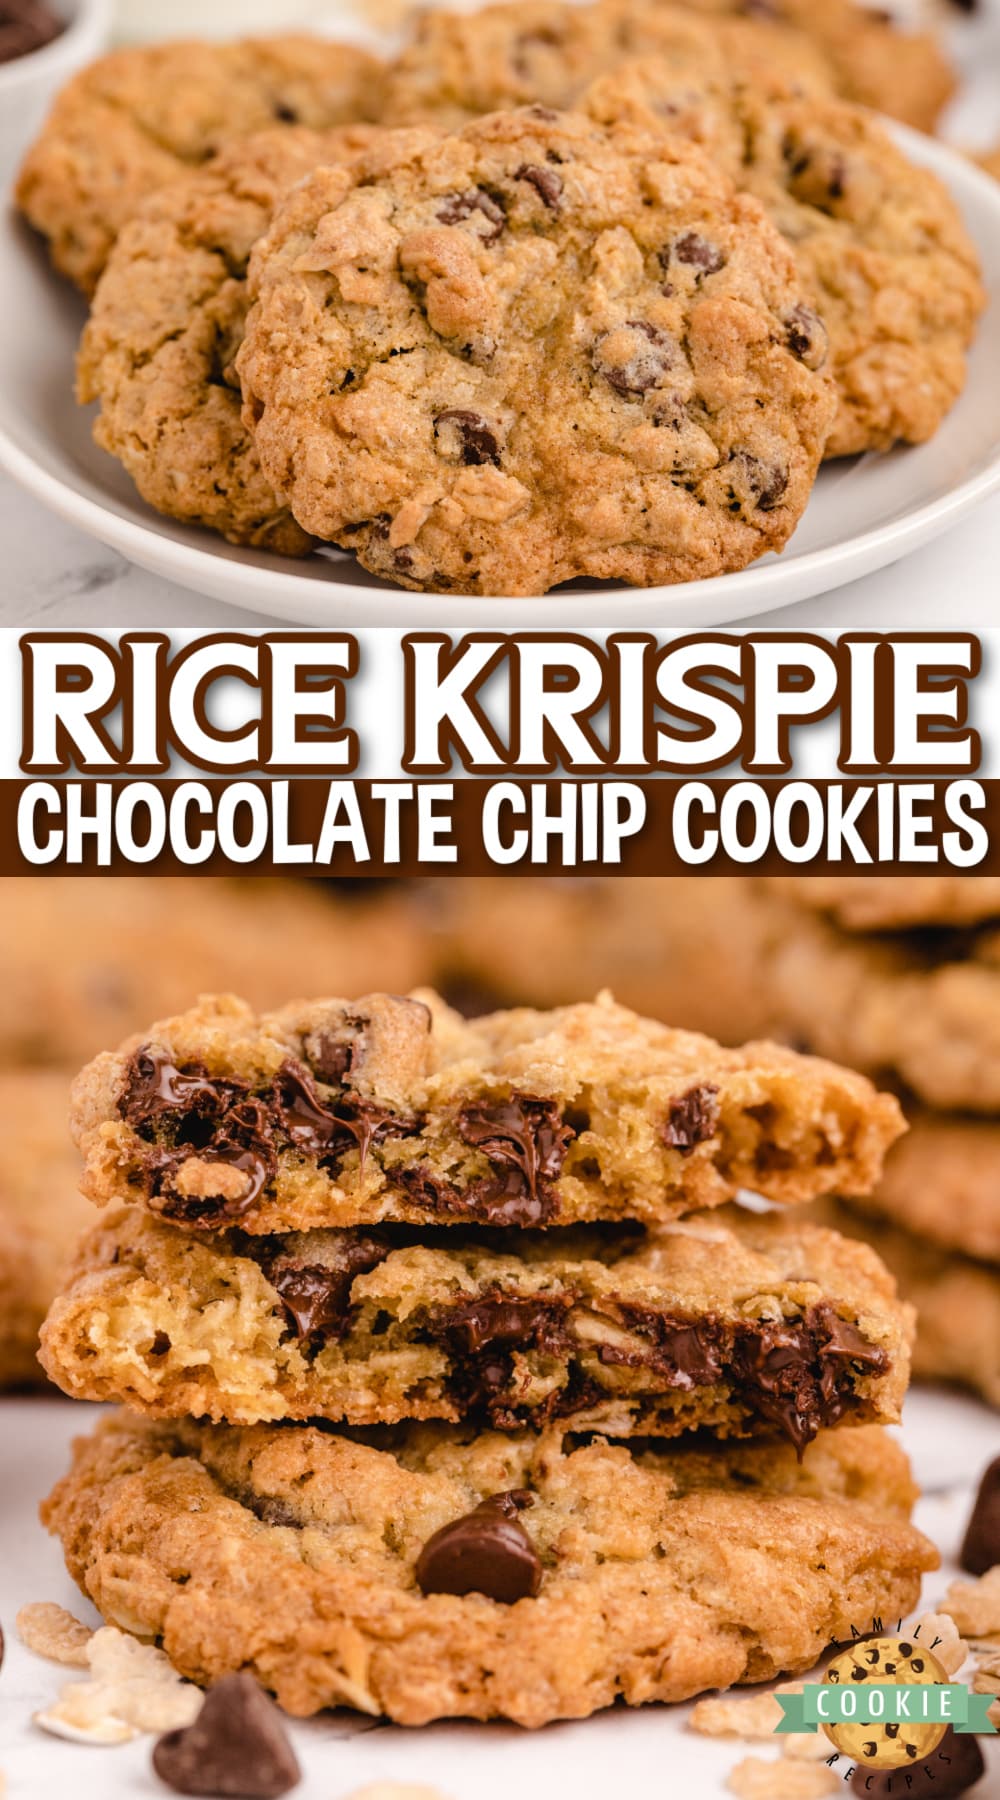 Rice Krispie Chocolate Chip Cookies are soft, chewy, and have a little extra crunch! Adding rice krispie cereal to chocolate chip cookies is such a good idea - you'll never want to eat them without that extra addition again!